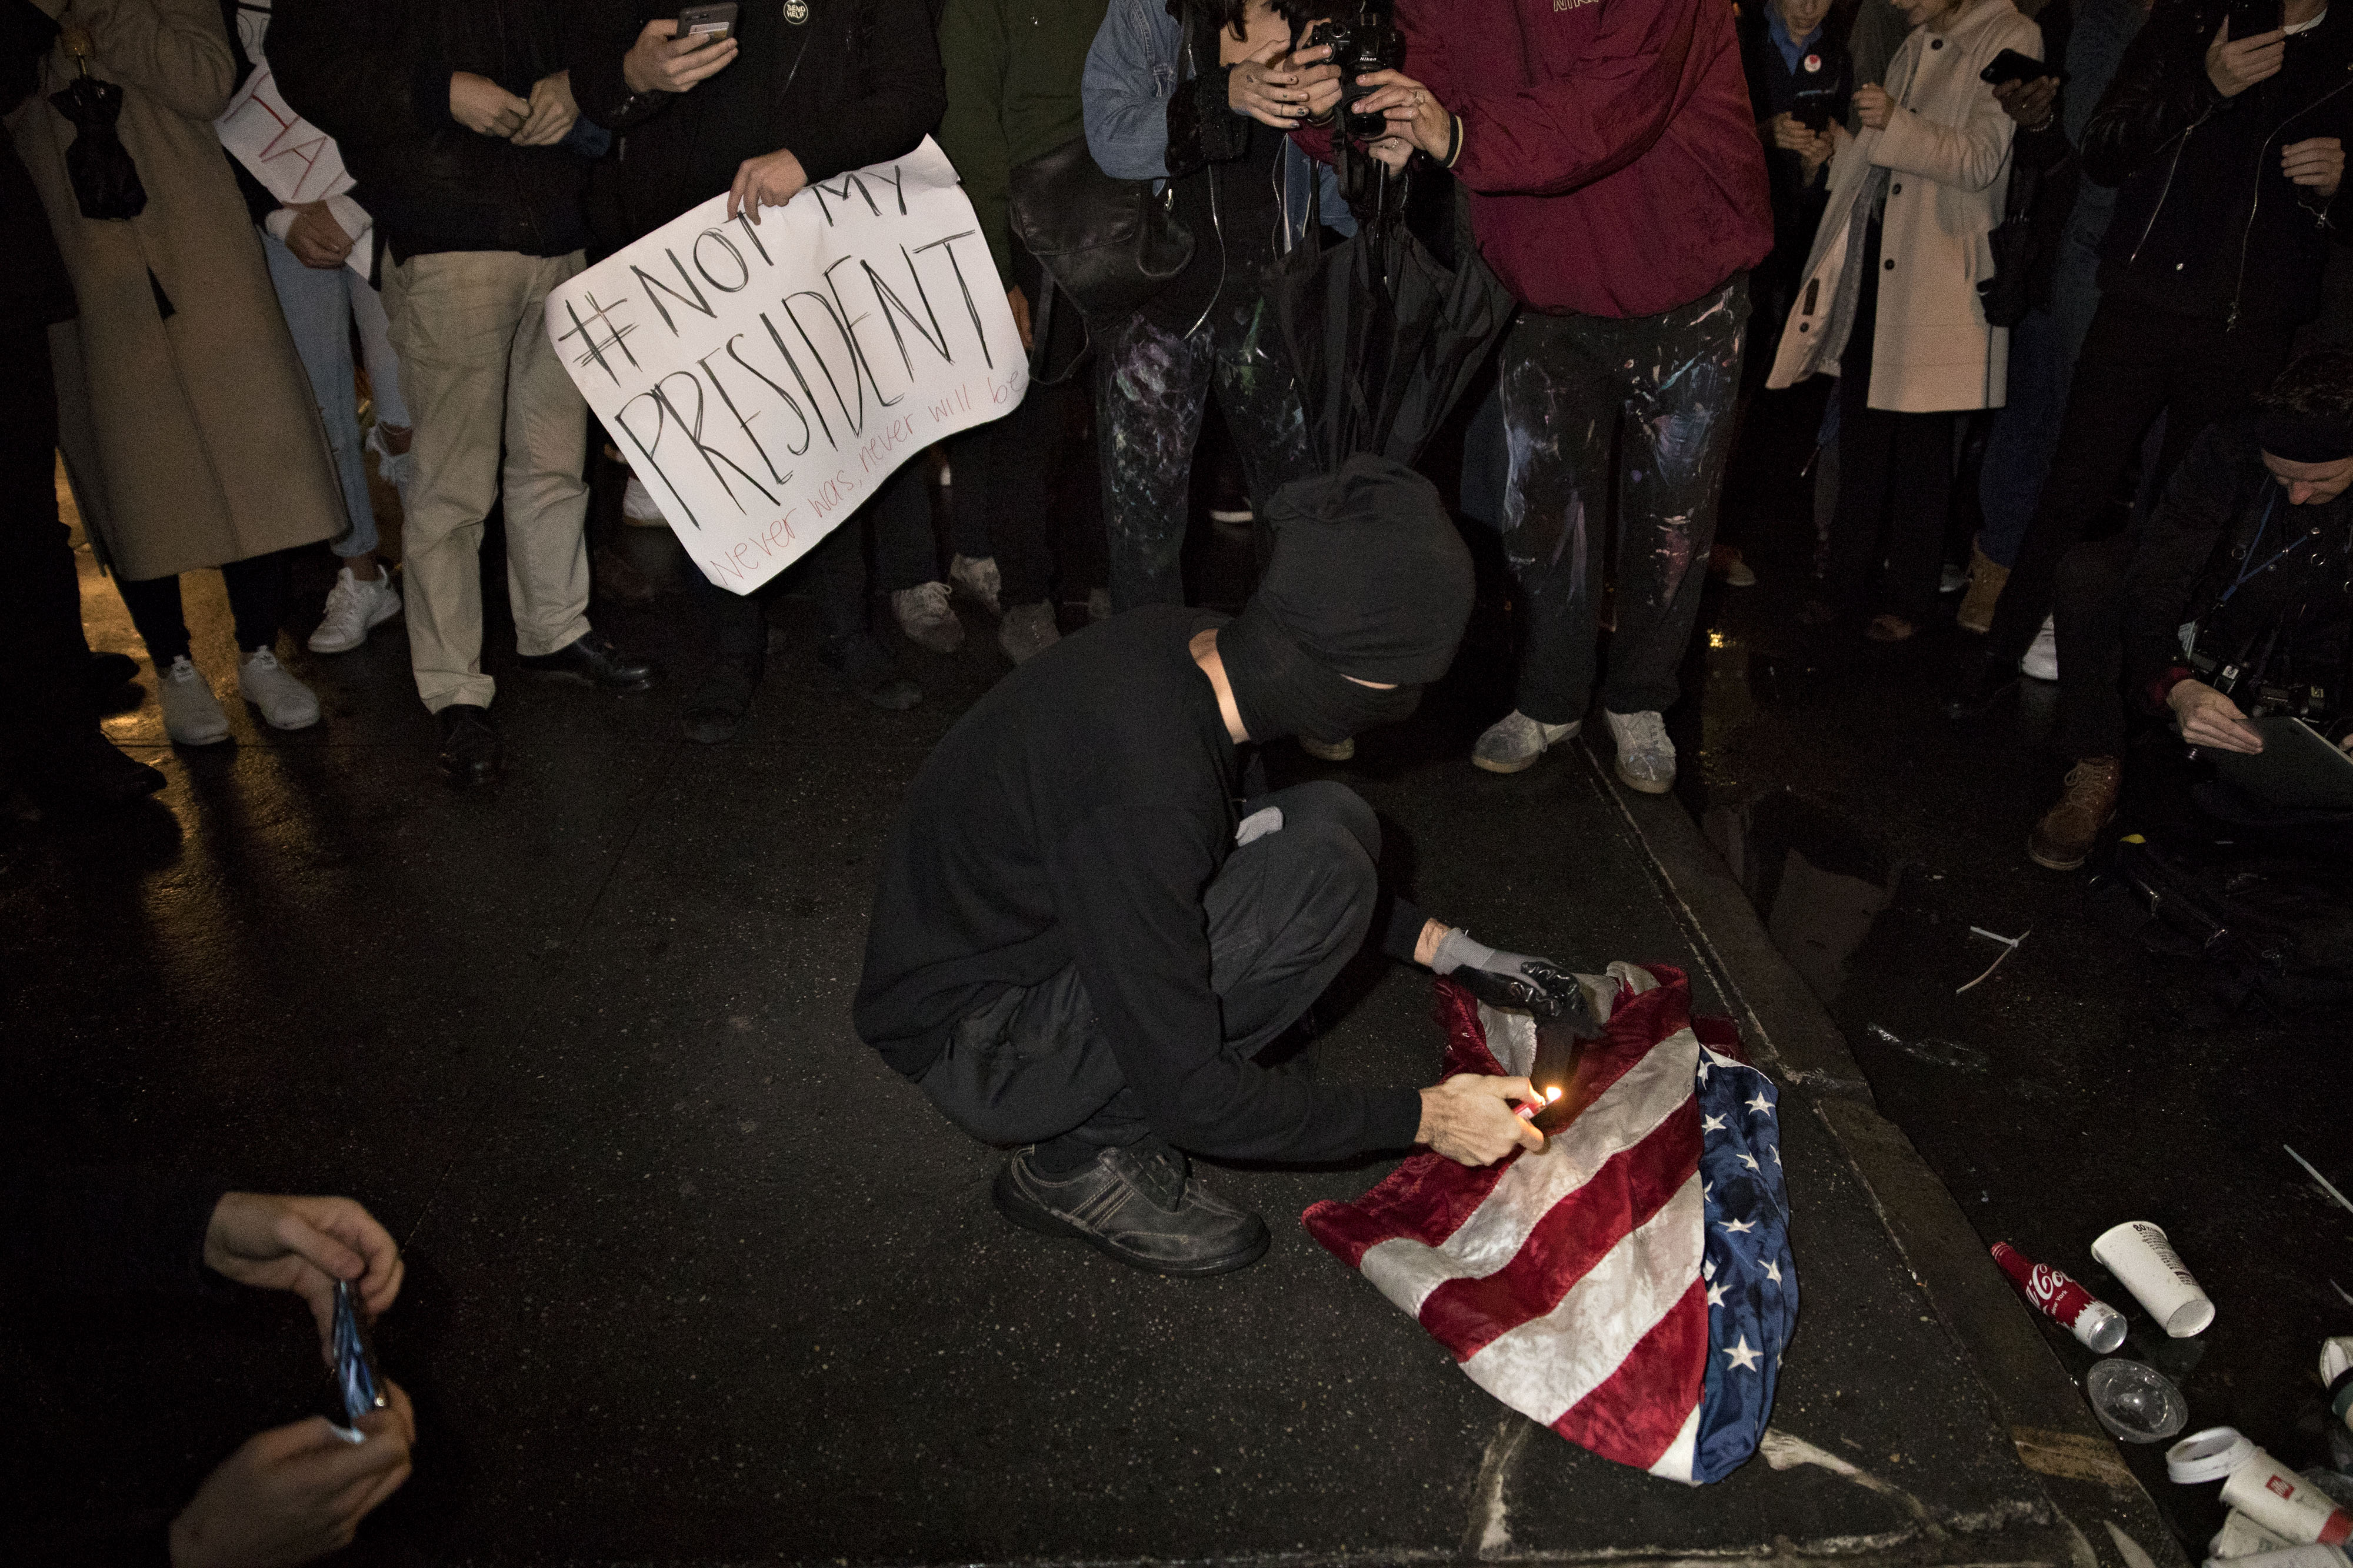 A demonstrator lights an American flag on fire during a rally against U.S. President-elect Donald Trump near Trump Tower in New York, U.S., on Wednesday, Nov. 9, 2016. (Andrew Harrer—Bloomberg/Getty Images)